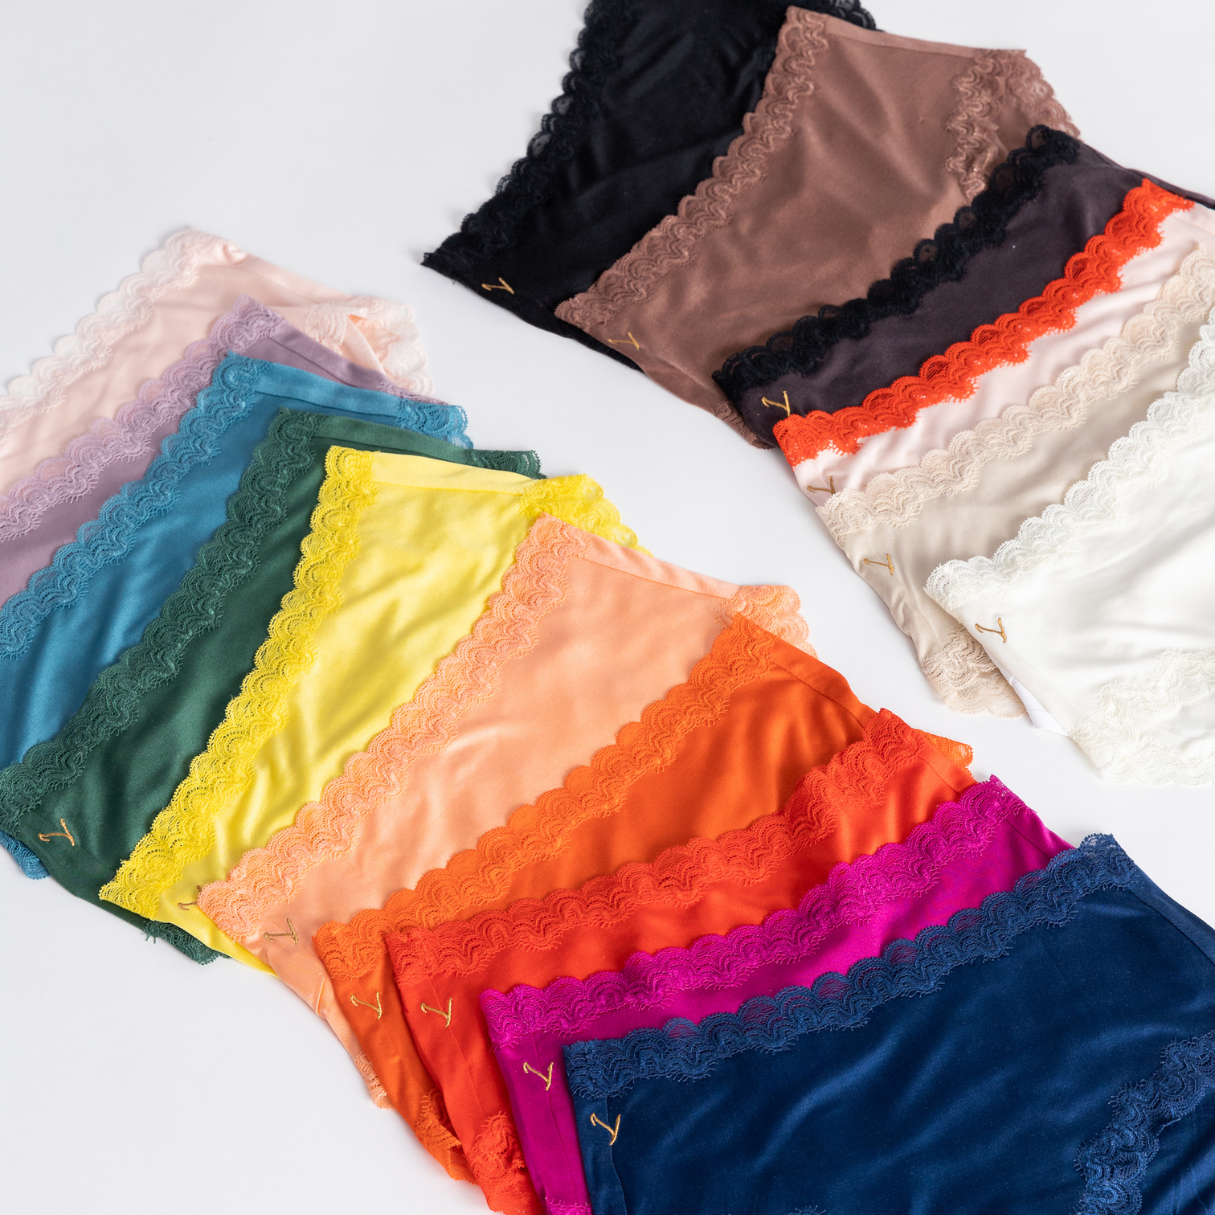 Are silk panties better than cotton?